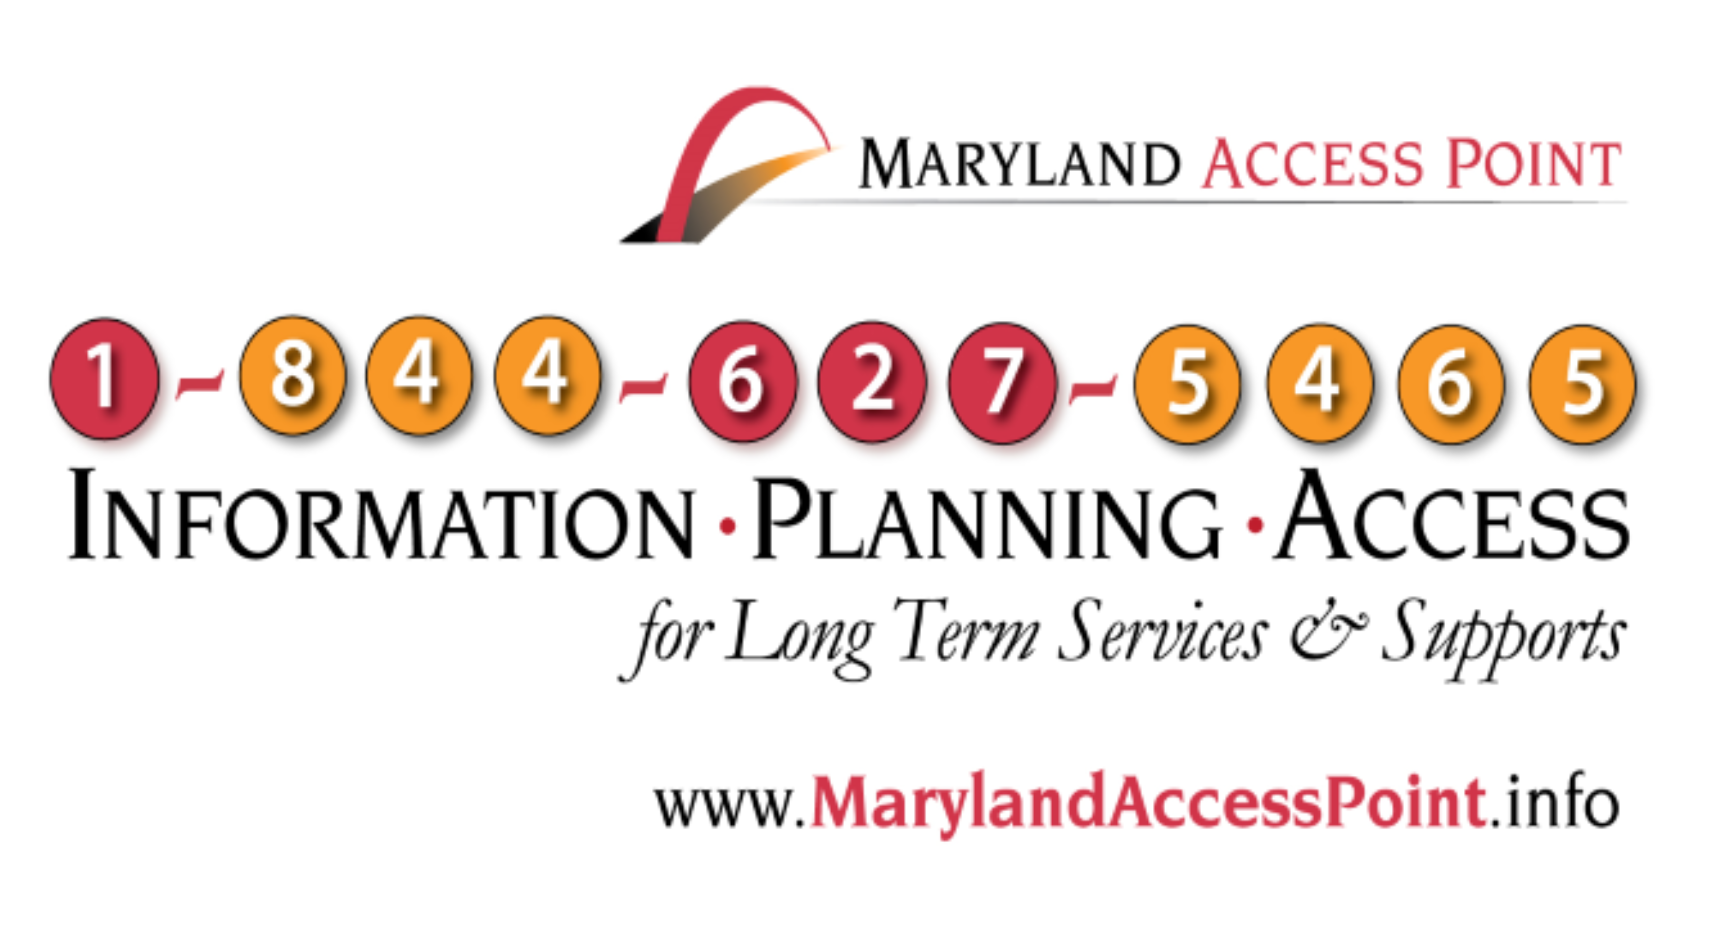 MAP - Maryland Access Point 1-844-627-5465